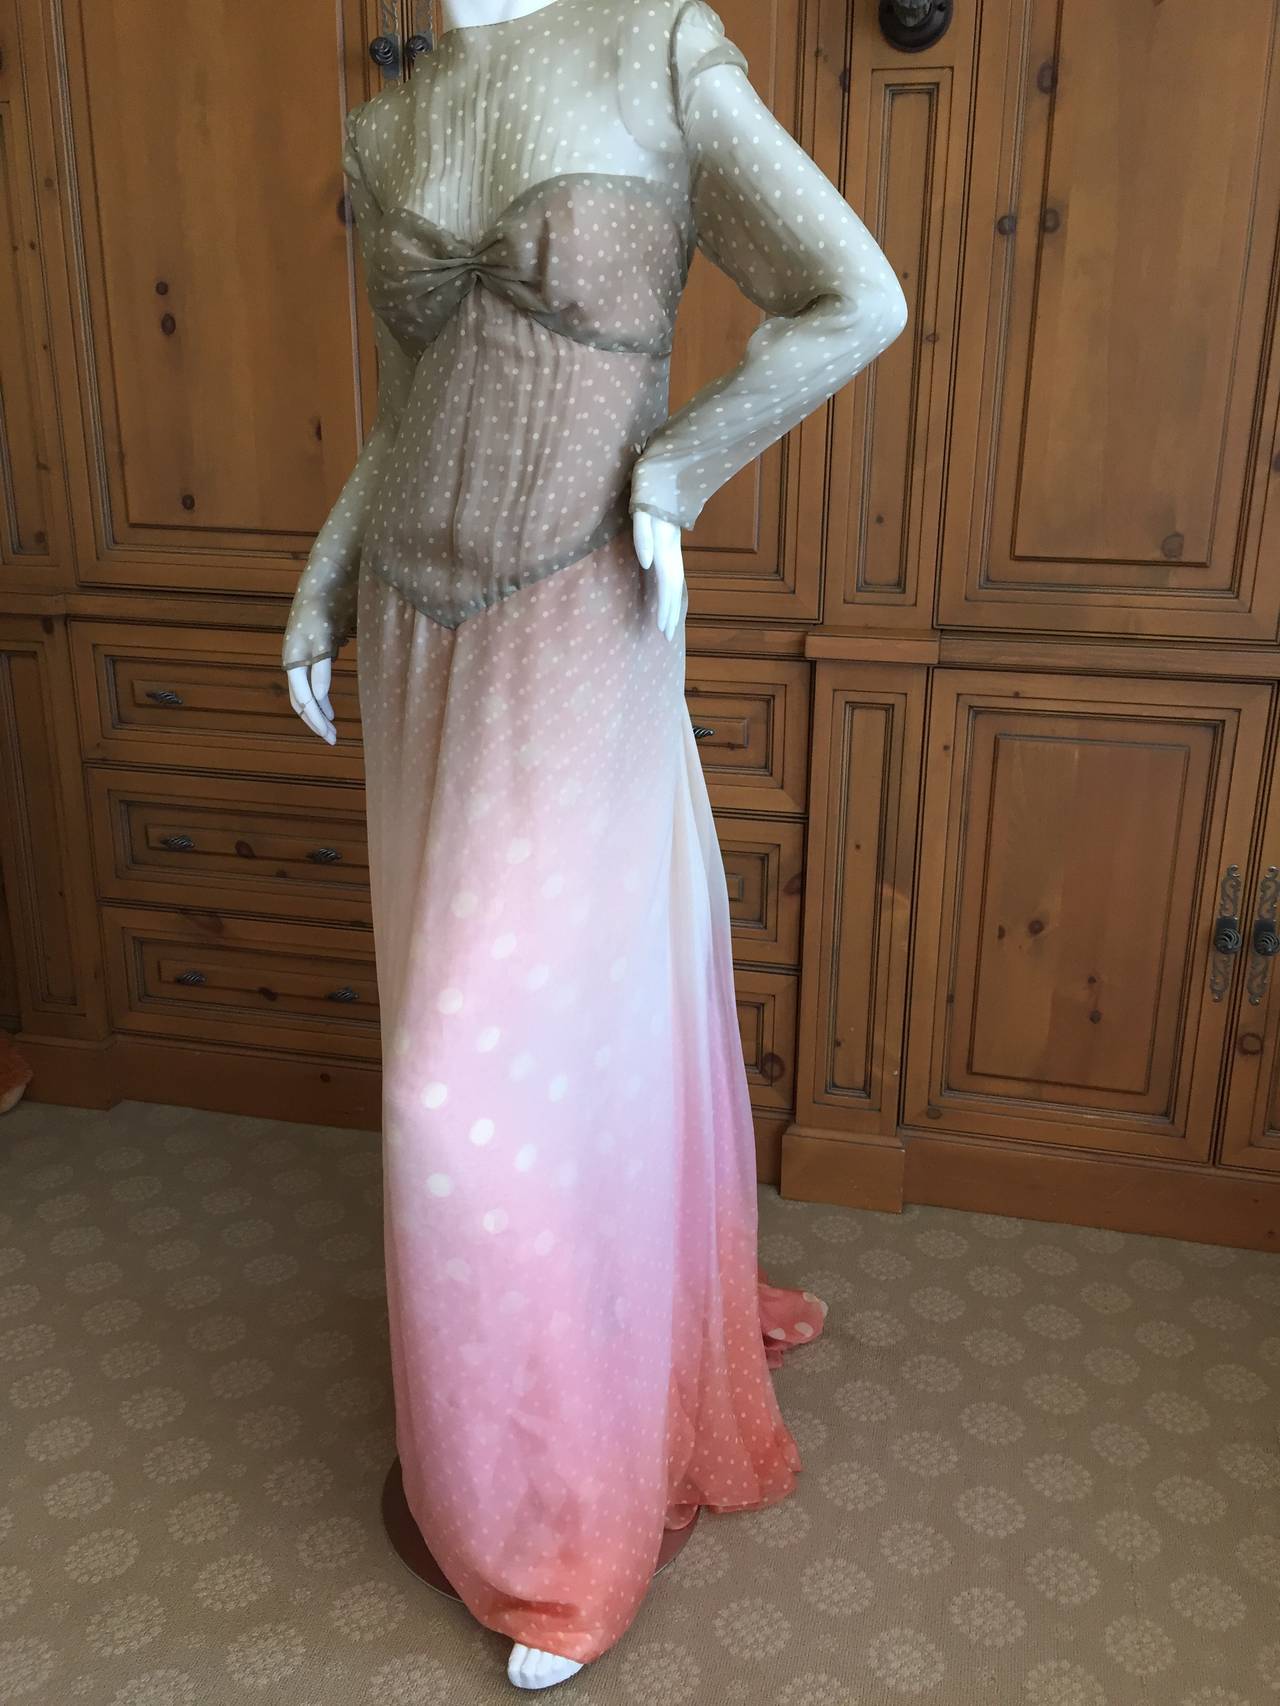 Bill Blass 1970's Sheer Silk Chiffon Polka Dot Ombre Illusion Dress
This is hard to capture in a photo.
The bodice is semi sheer and has a bandeau illusion, kind of like a belly dancer ensemble.
Miles of silk chiffon, it would be fun to dance